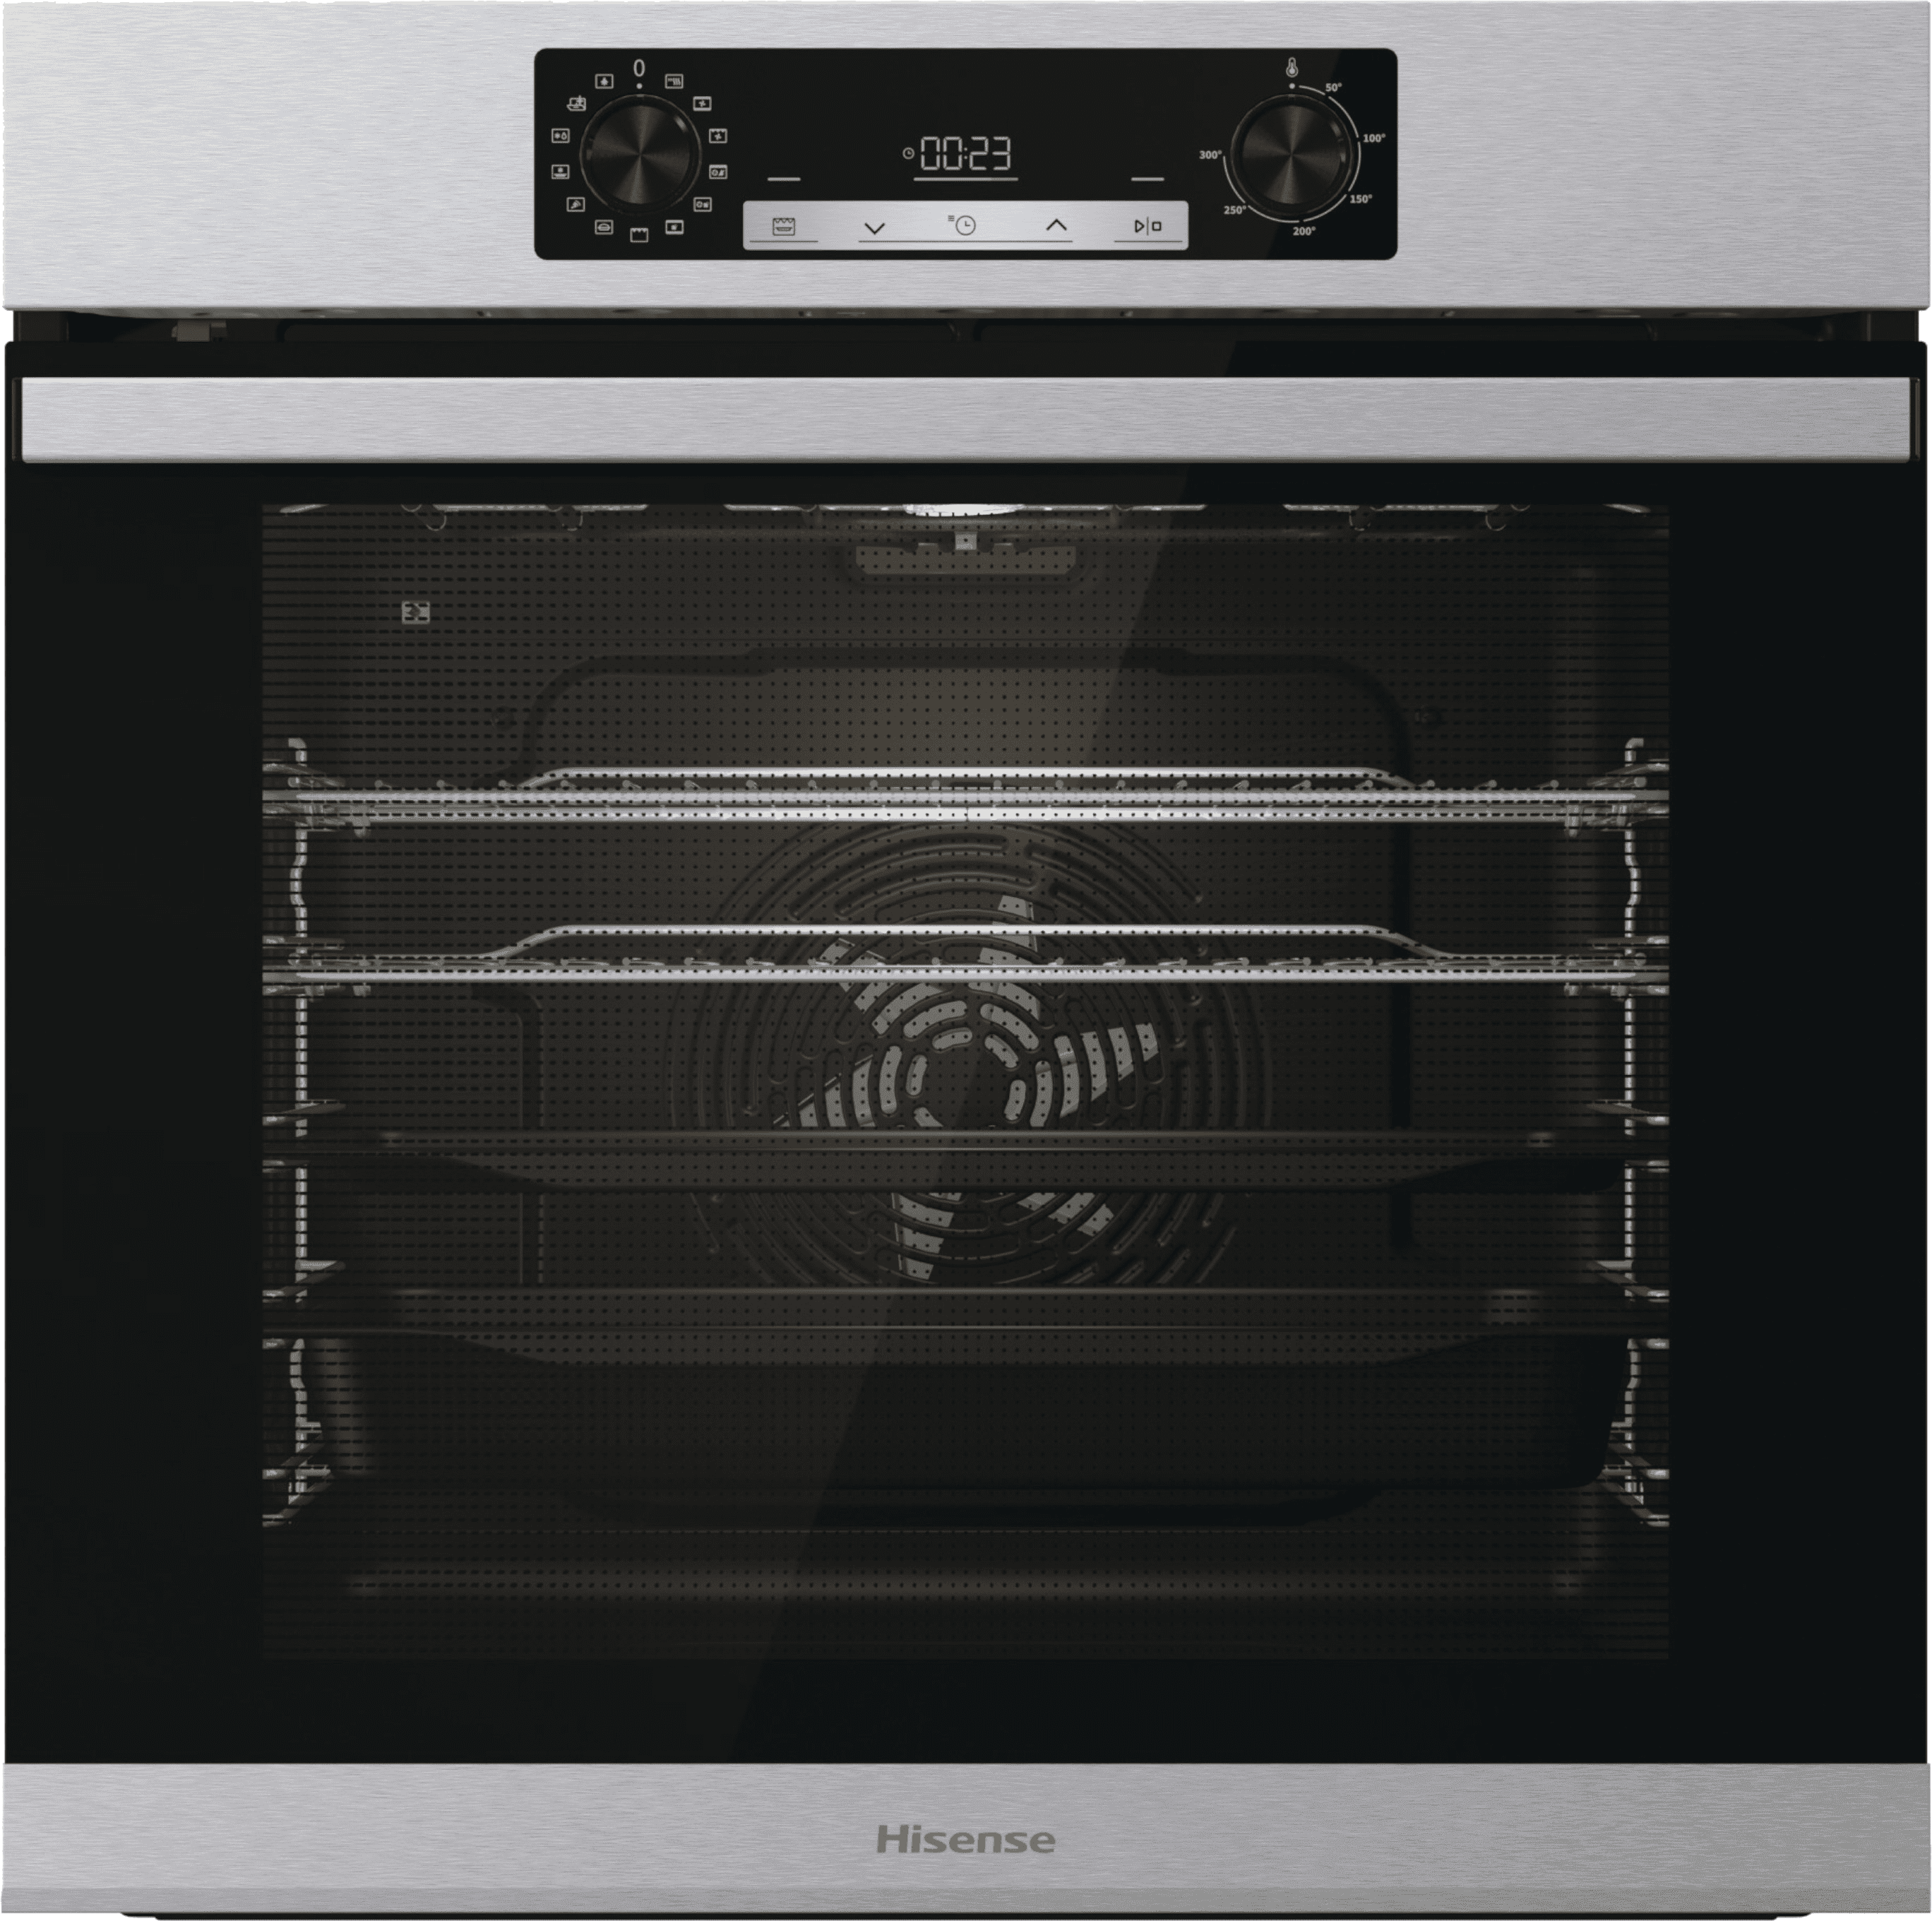 Hisense BSA65222PXUK Built In Electric Single Oven and Pyrolytic Cleaning - Stainless Steel - A+ Rated, Stainless Steel